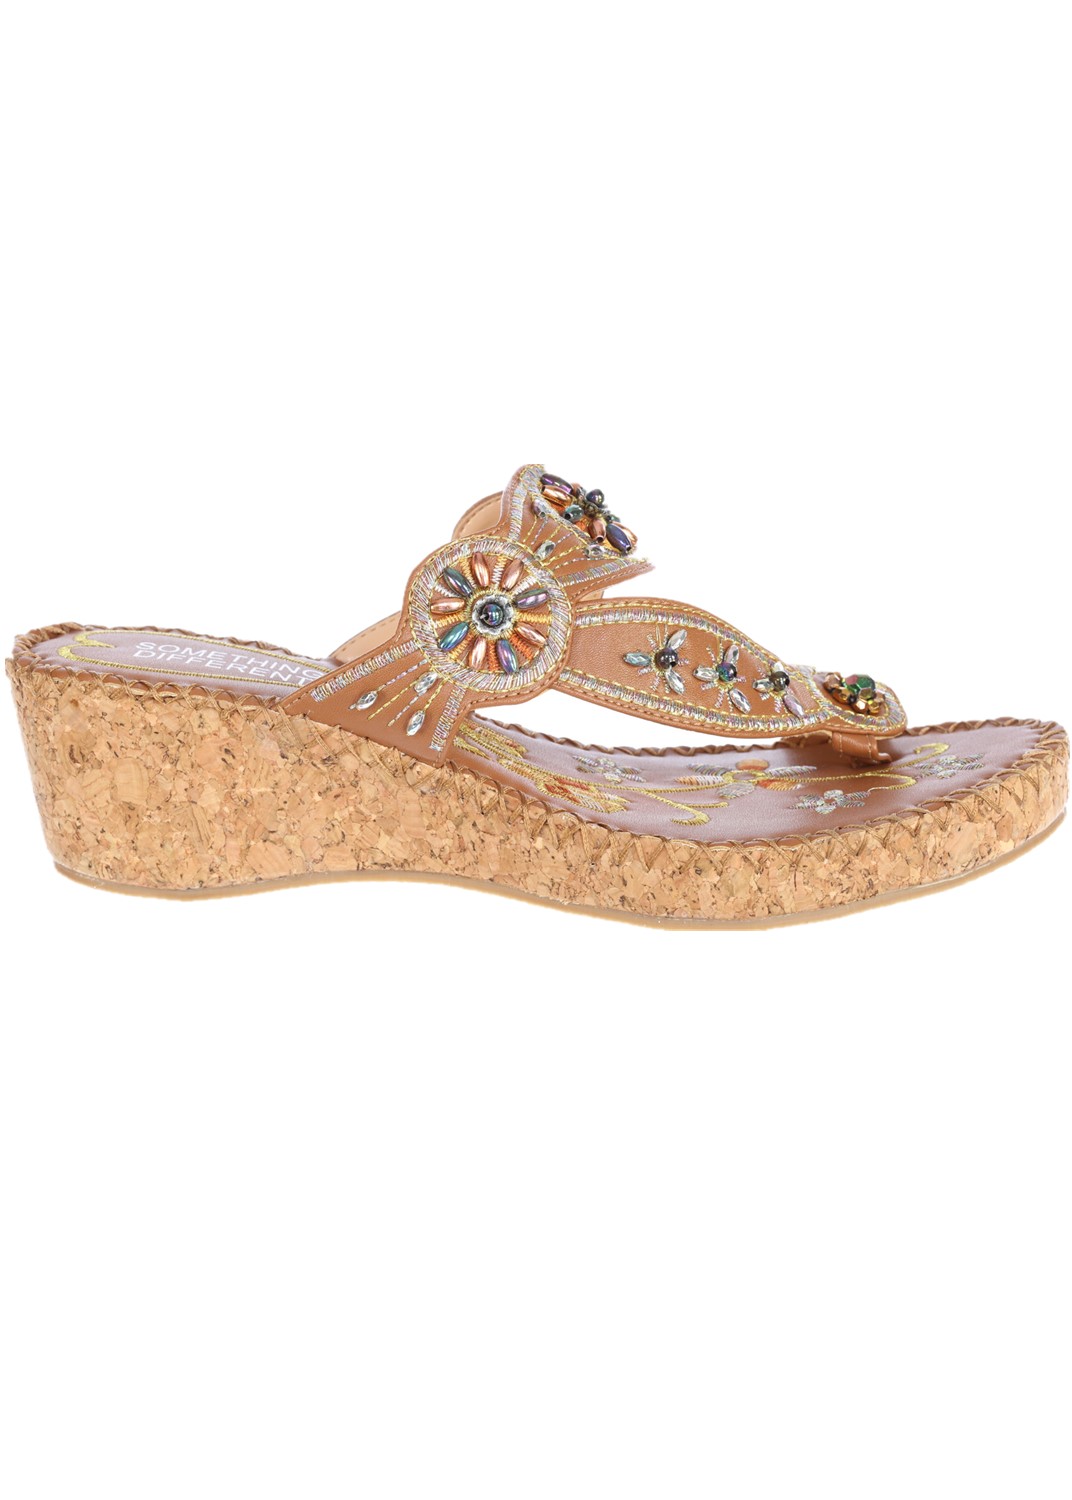 Women's Casual Embroided Beaded Wedge Sandals-Brown-6 - image 1 of 3